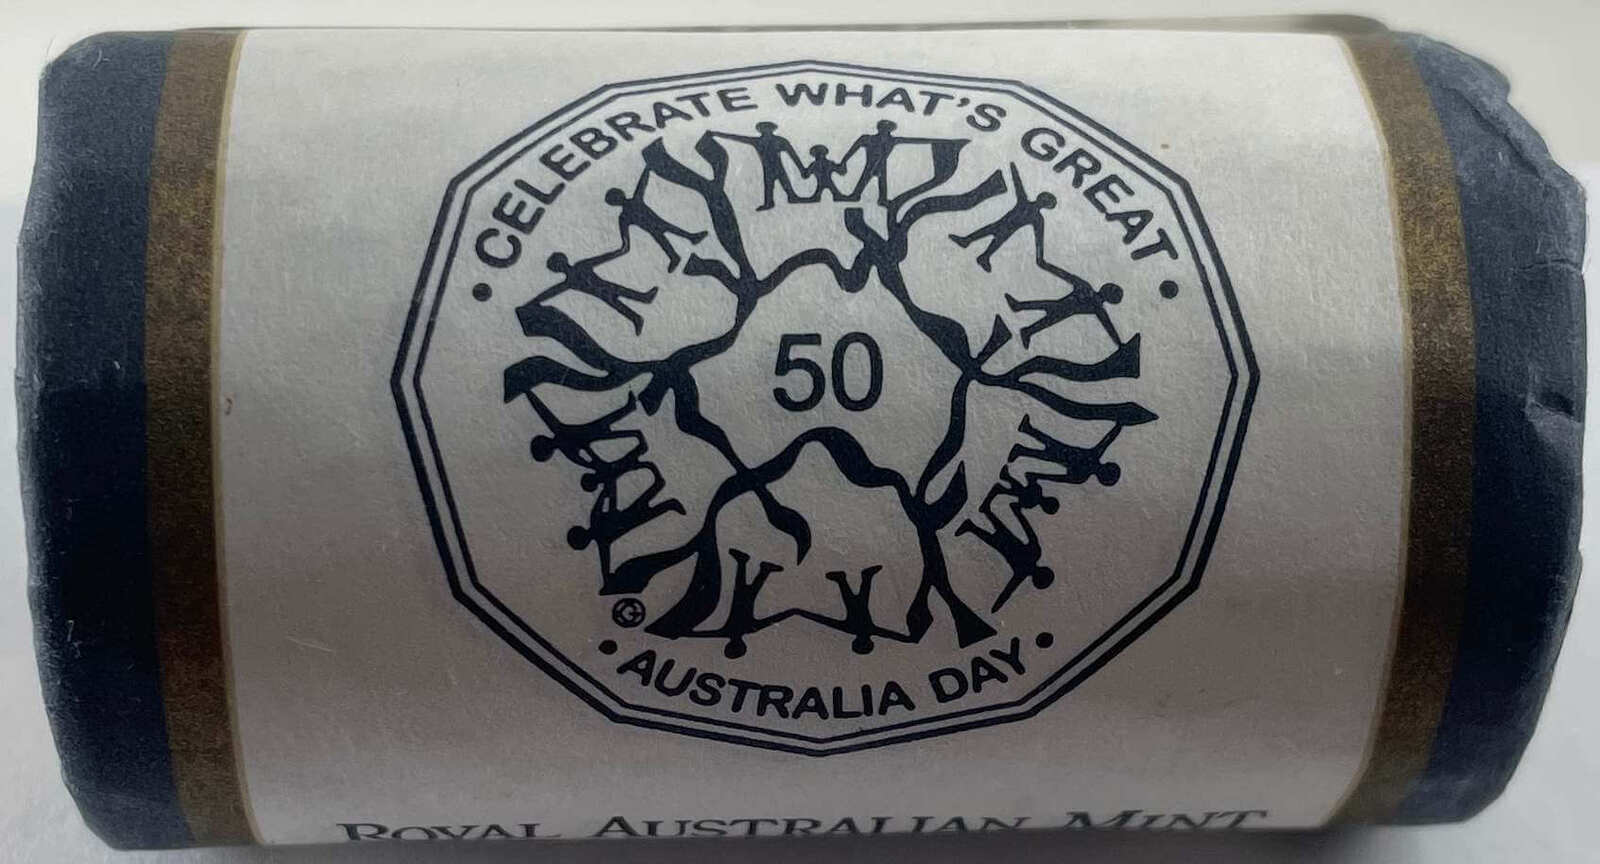 2010 50 Cent Mint Roll Australia Day Tails / Tails product image